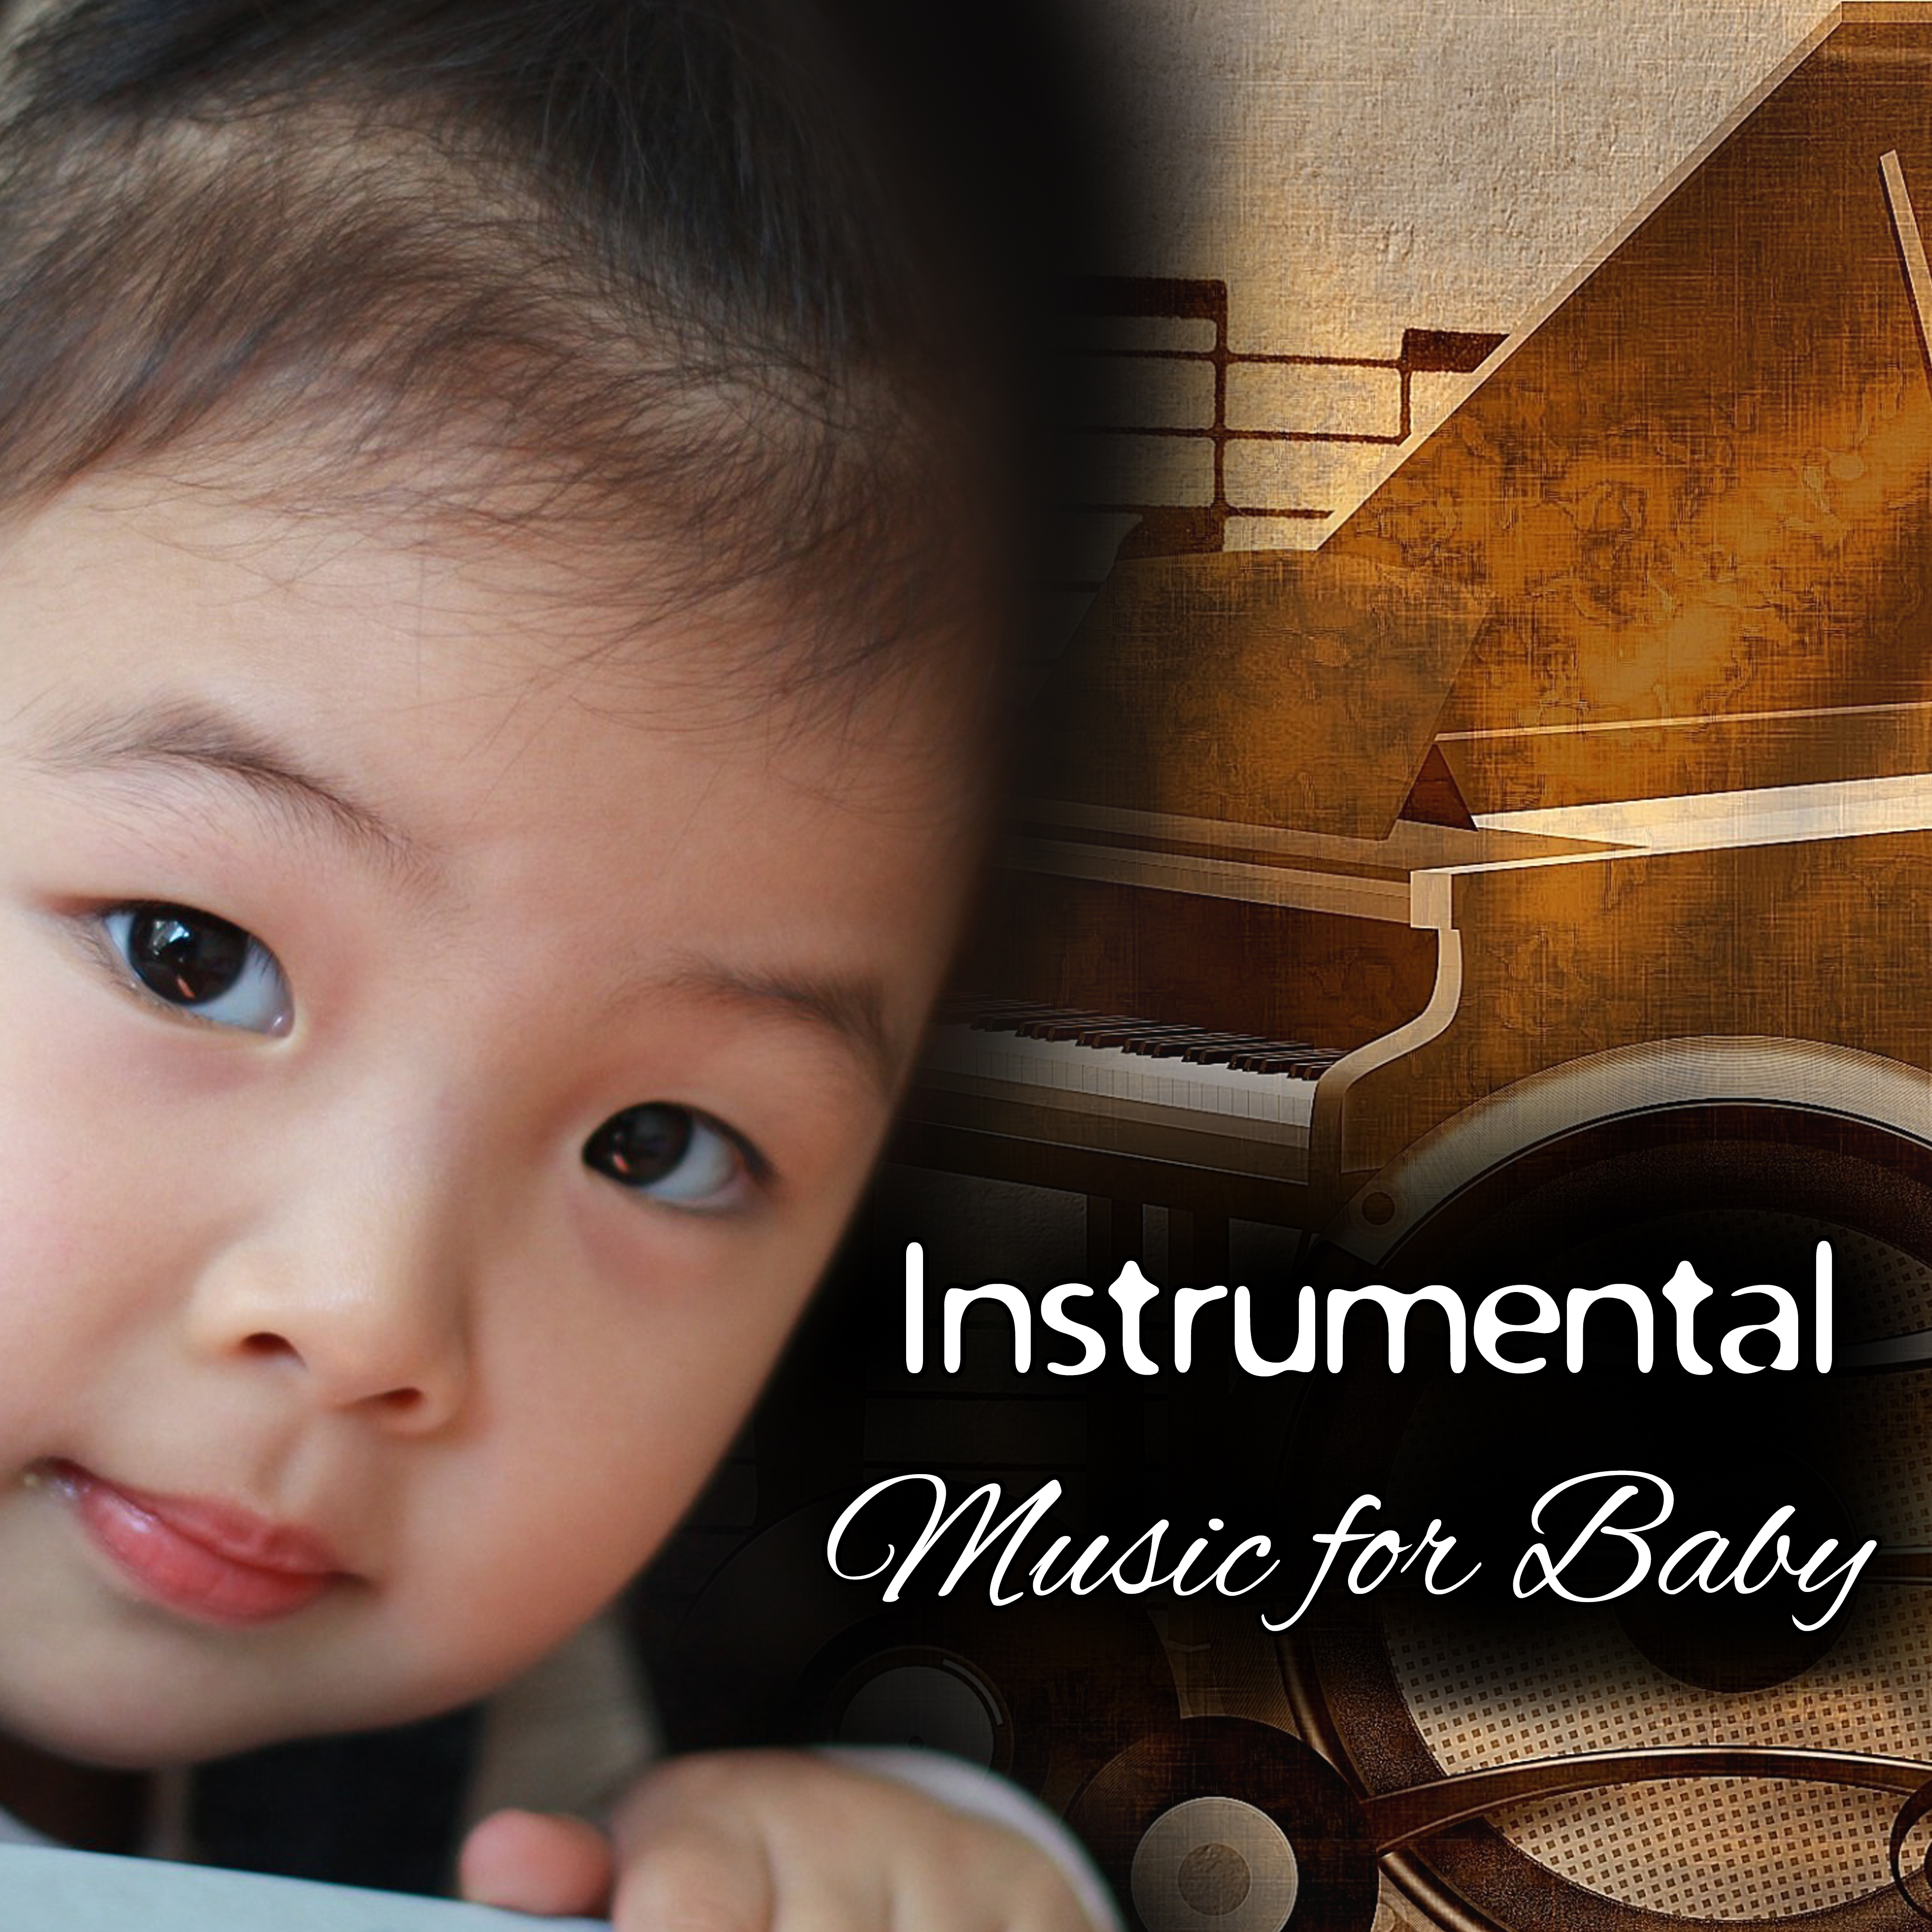 Instrumental Music for Baby – Educational Songs for Kids, Einstein Effect, Peaceful Classical Sounds, Baby Music, Mozart, Bach